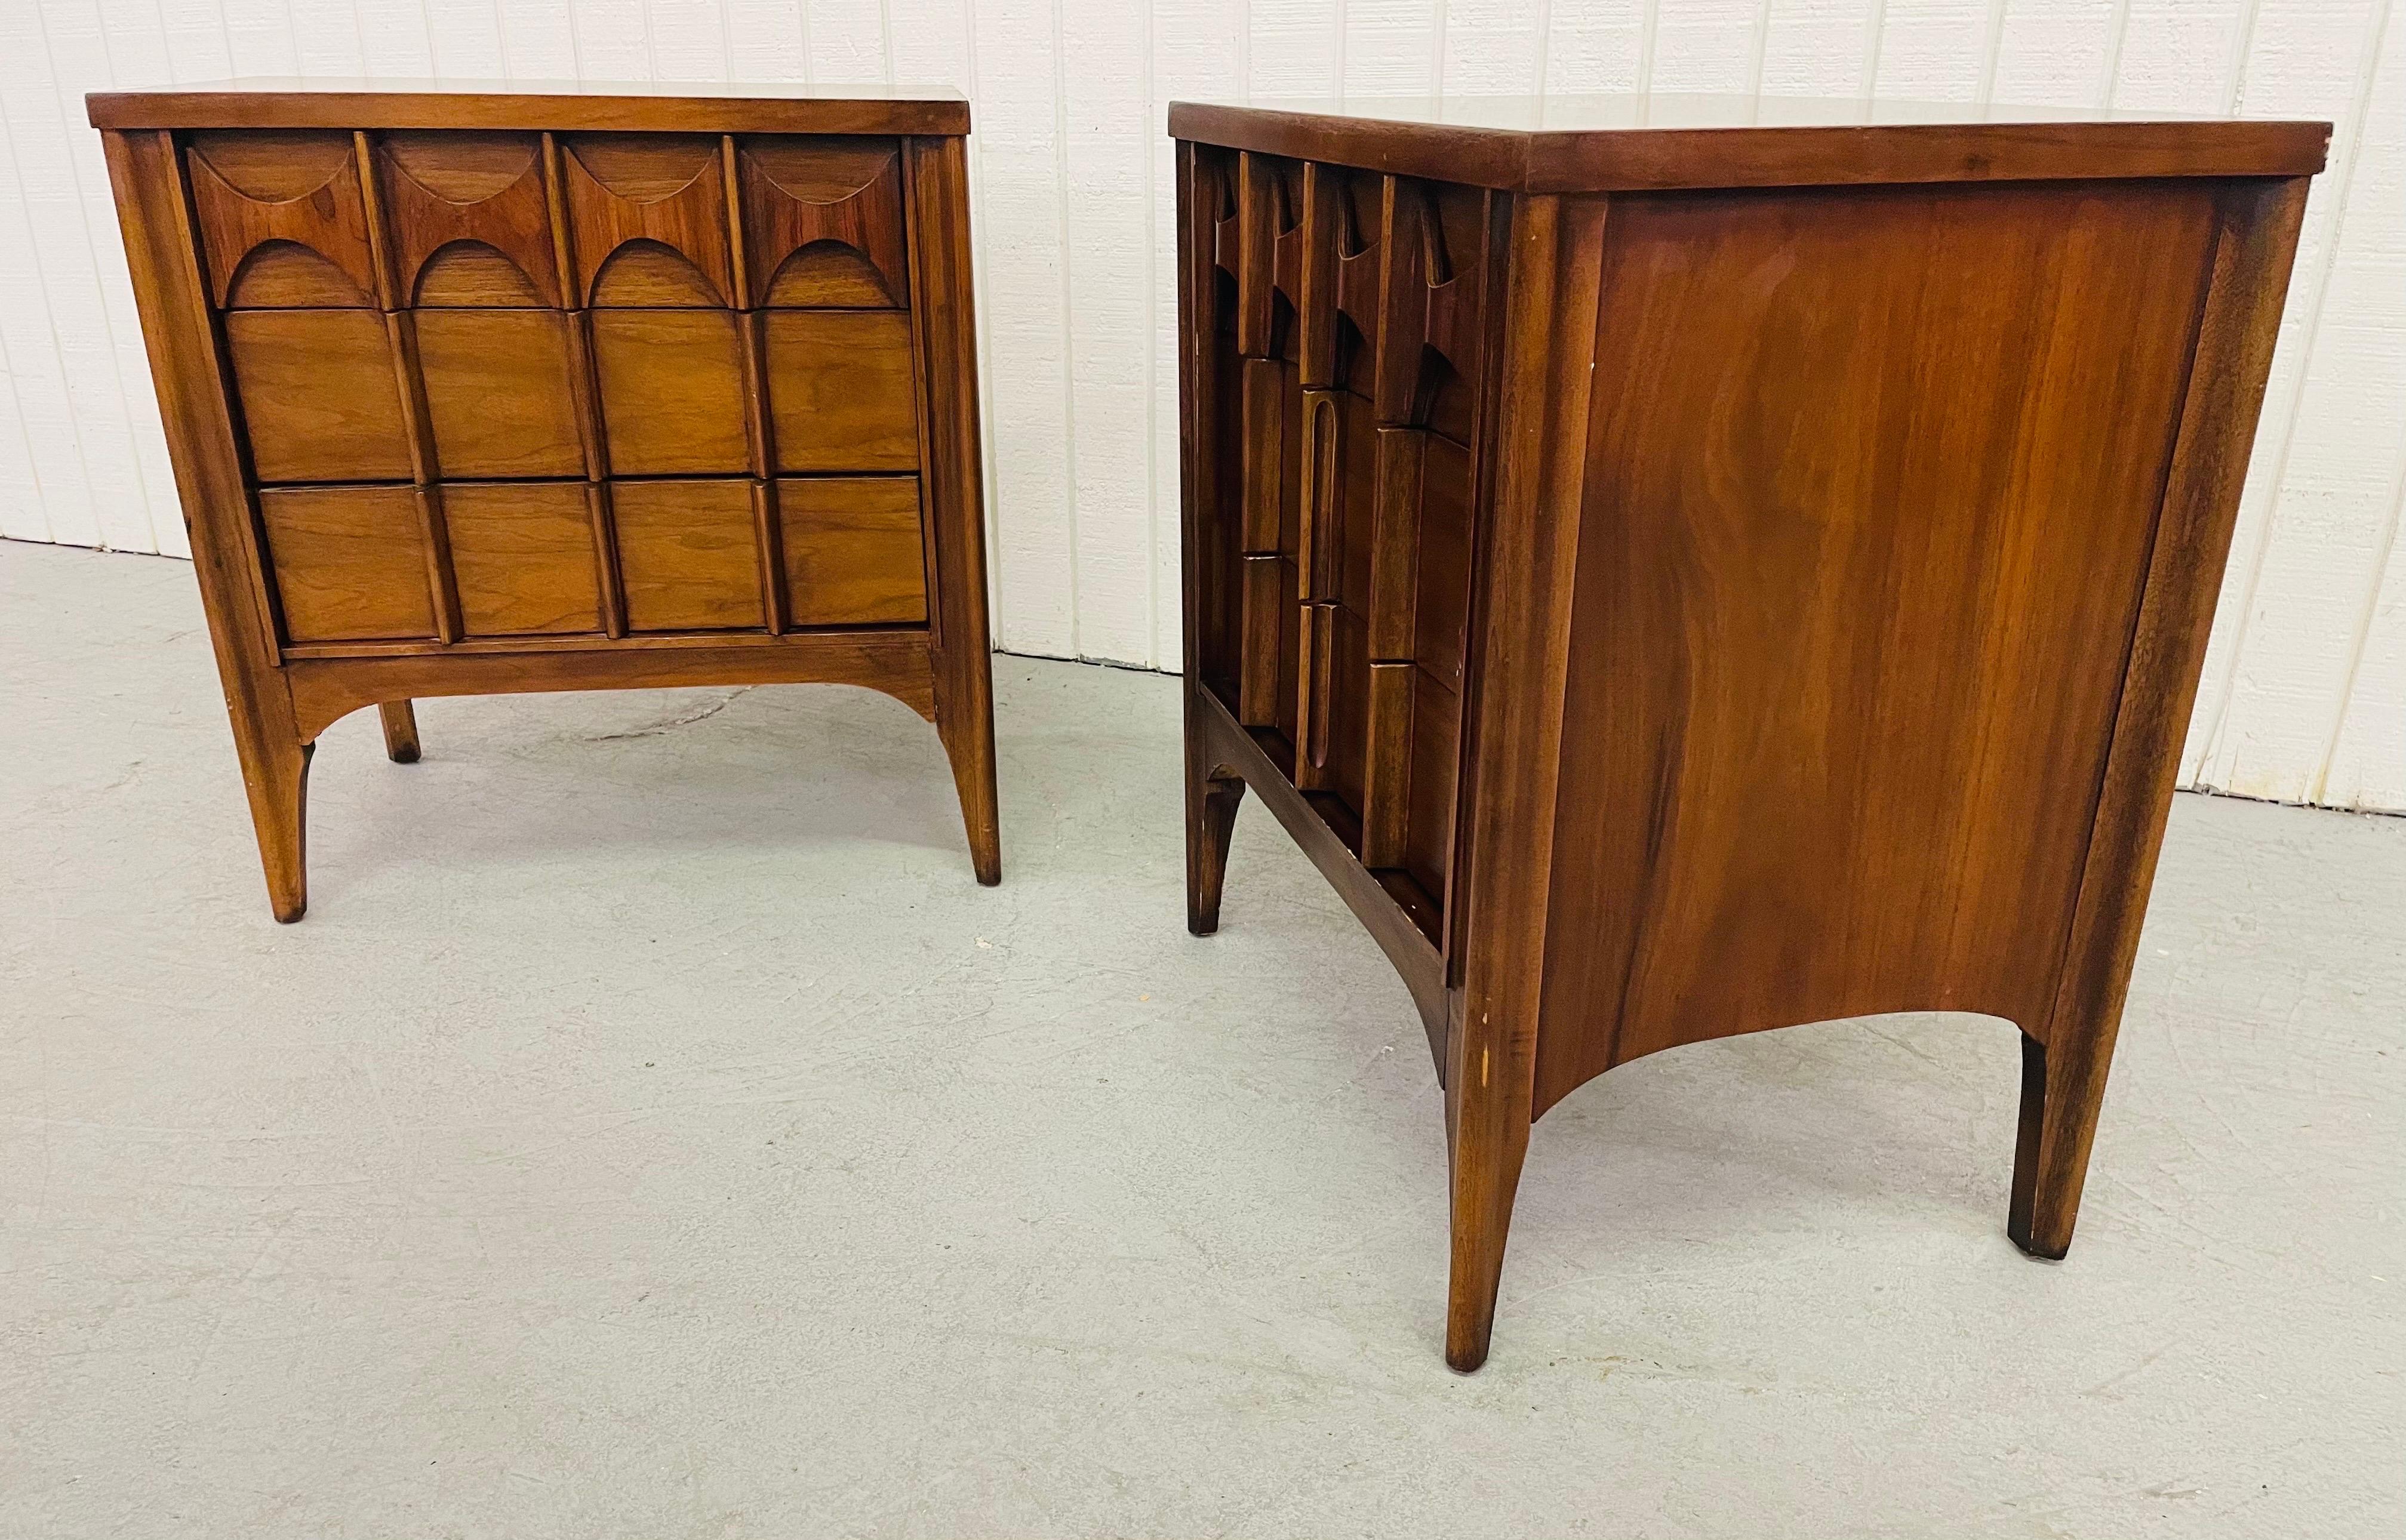 This listing is for a pair of mid-century Kent Coffey Perspecta walnut nightstands. Featuring three drawers for storage, rosewood pulls on the top drawers, and a beautiful walnut finish.